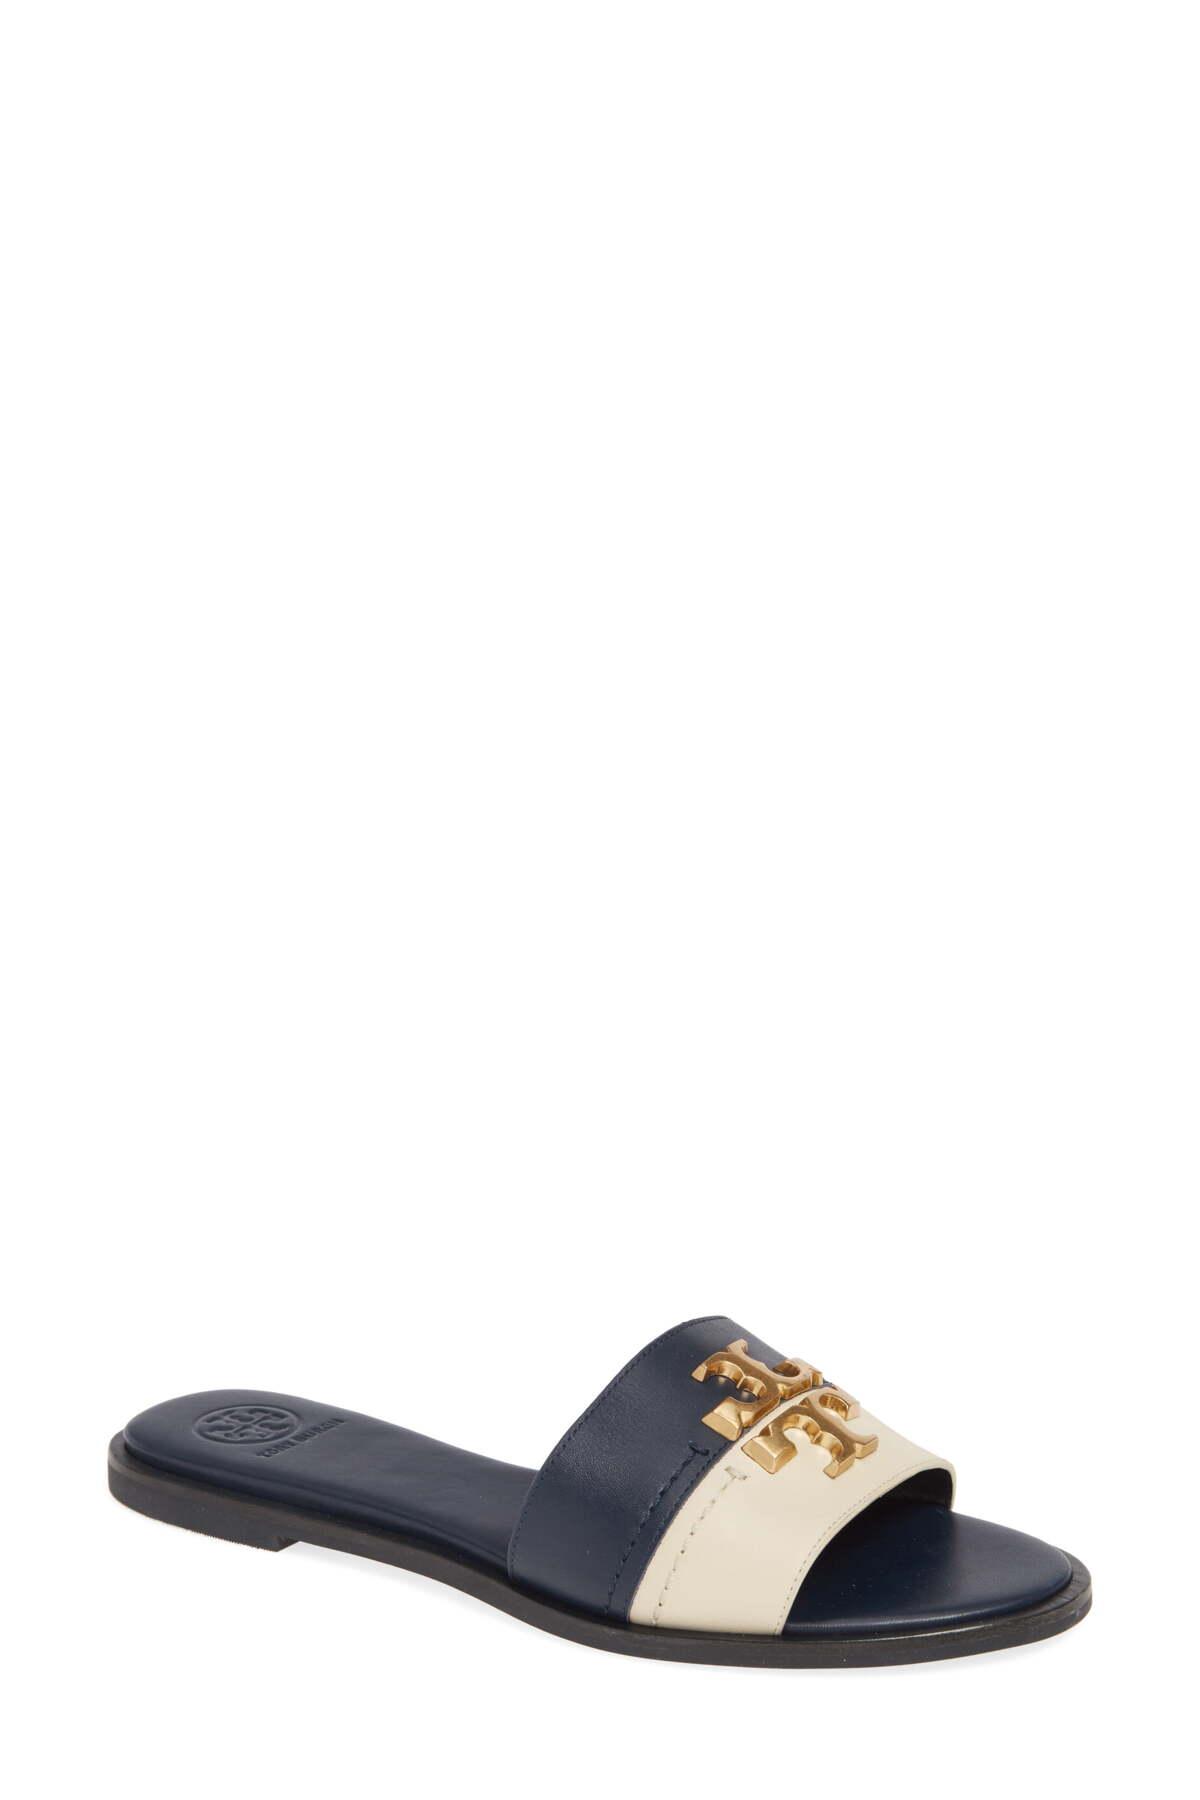 Tory Burch Leather Everly Slide Sandal - Lyst